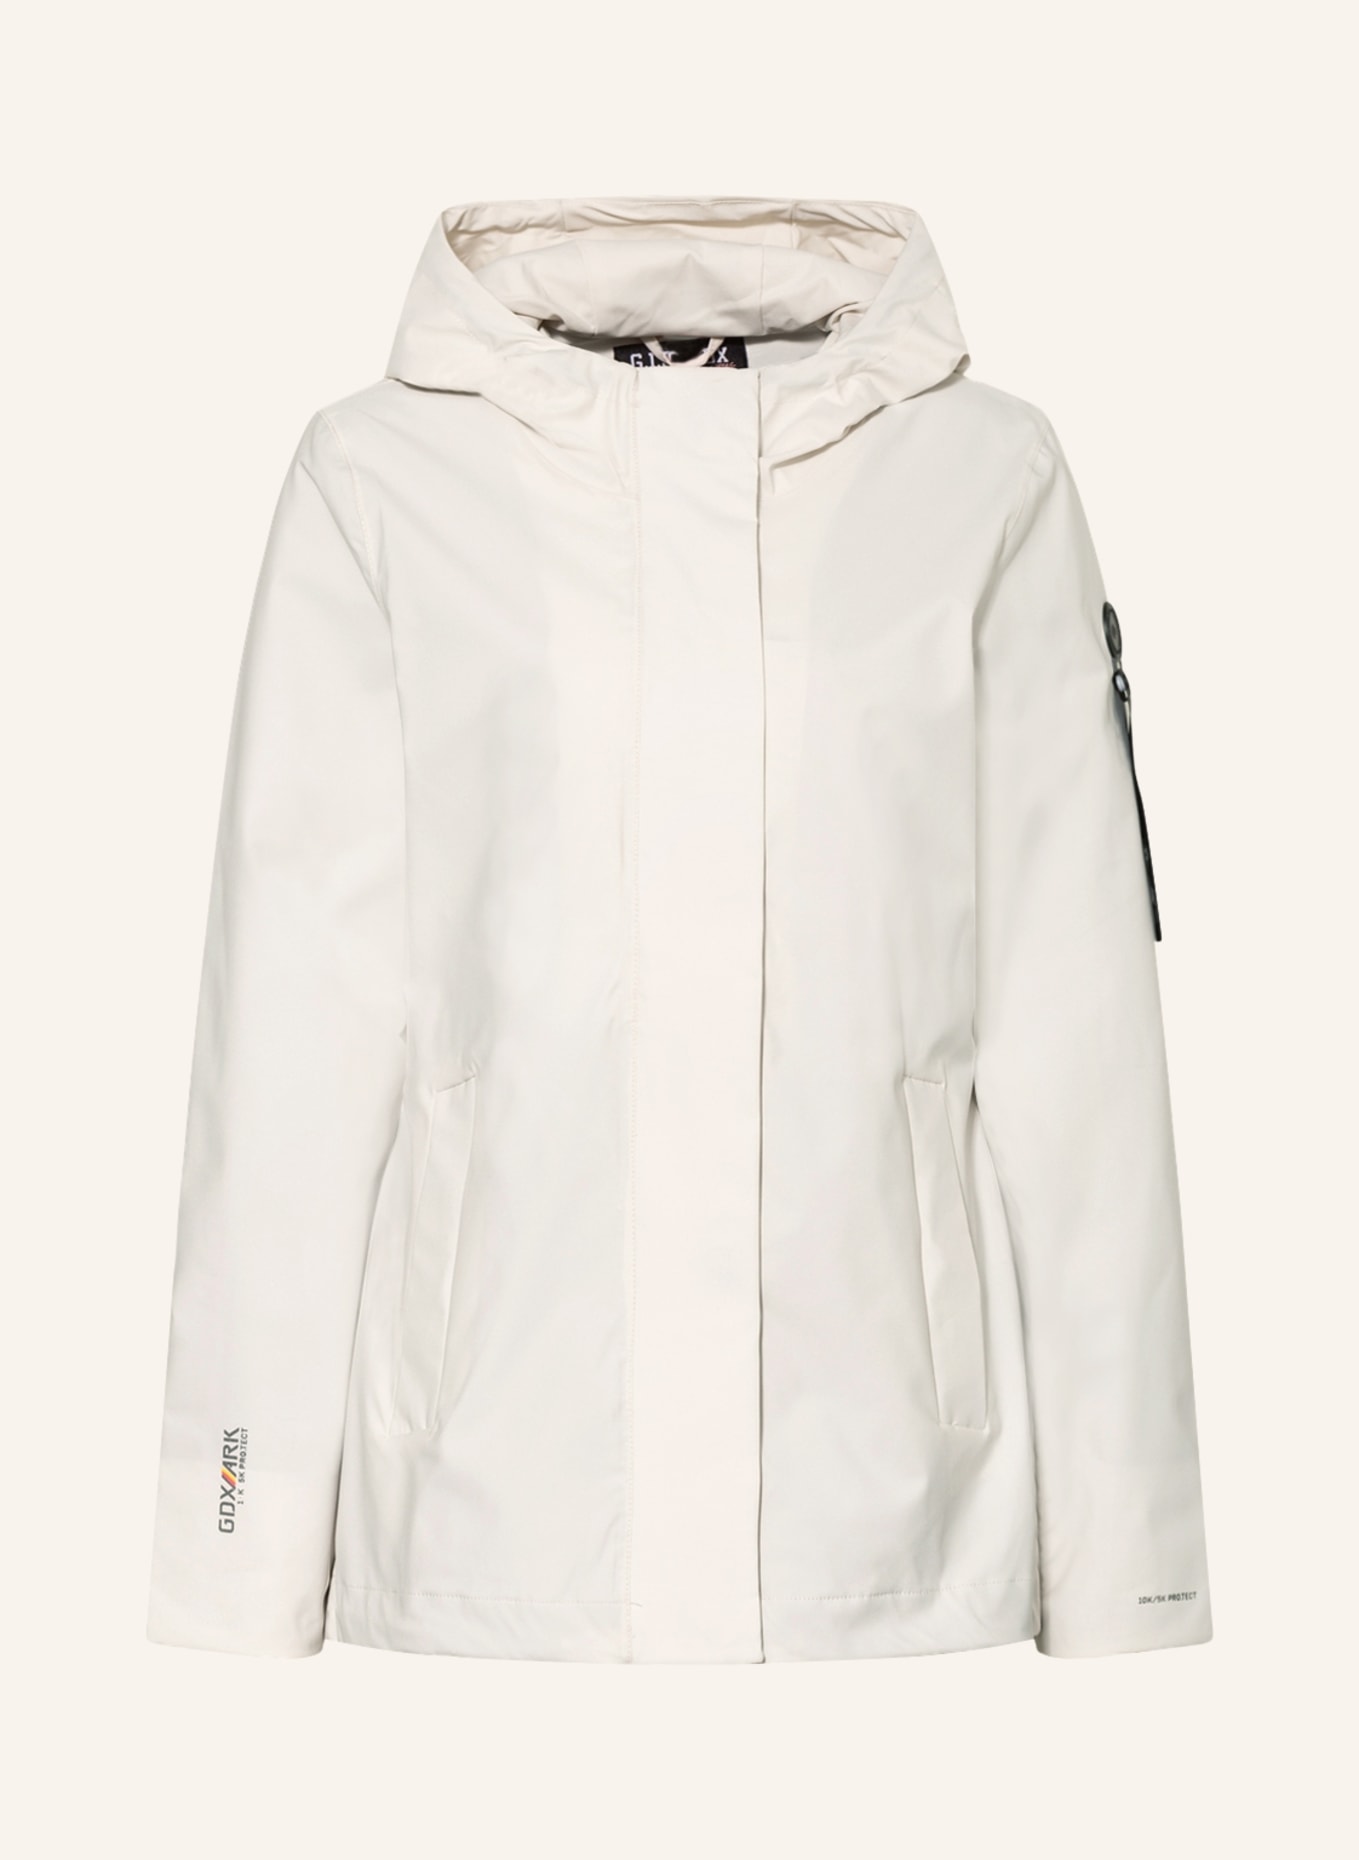 jacket in 152 DX Outdoor by GS G.I.G.A. cream killtec